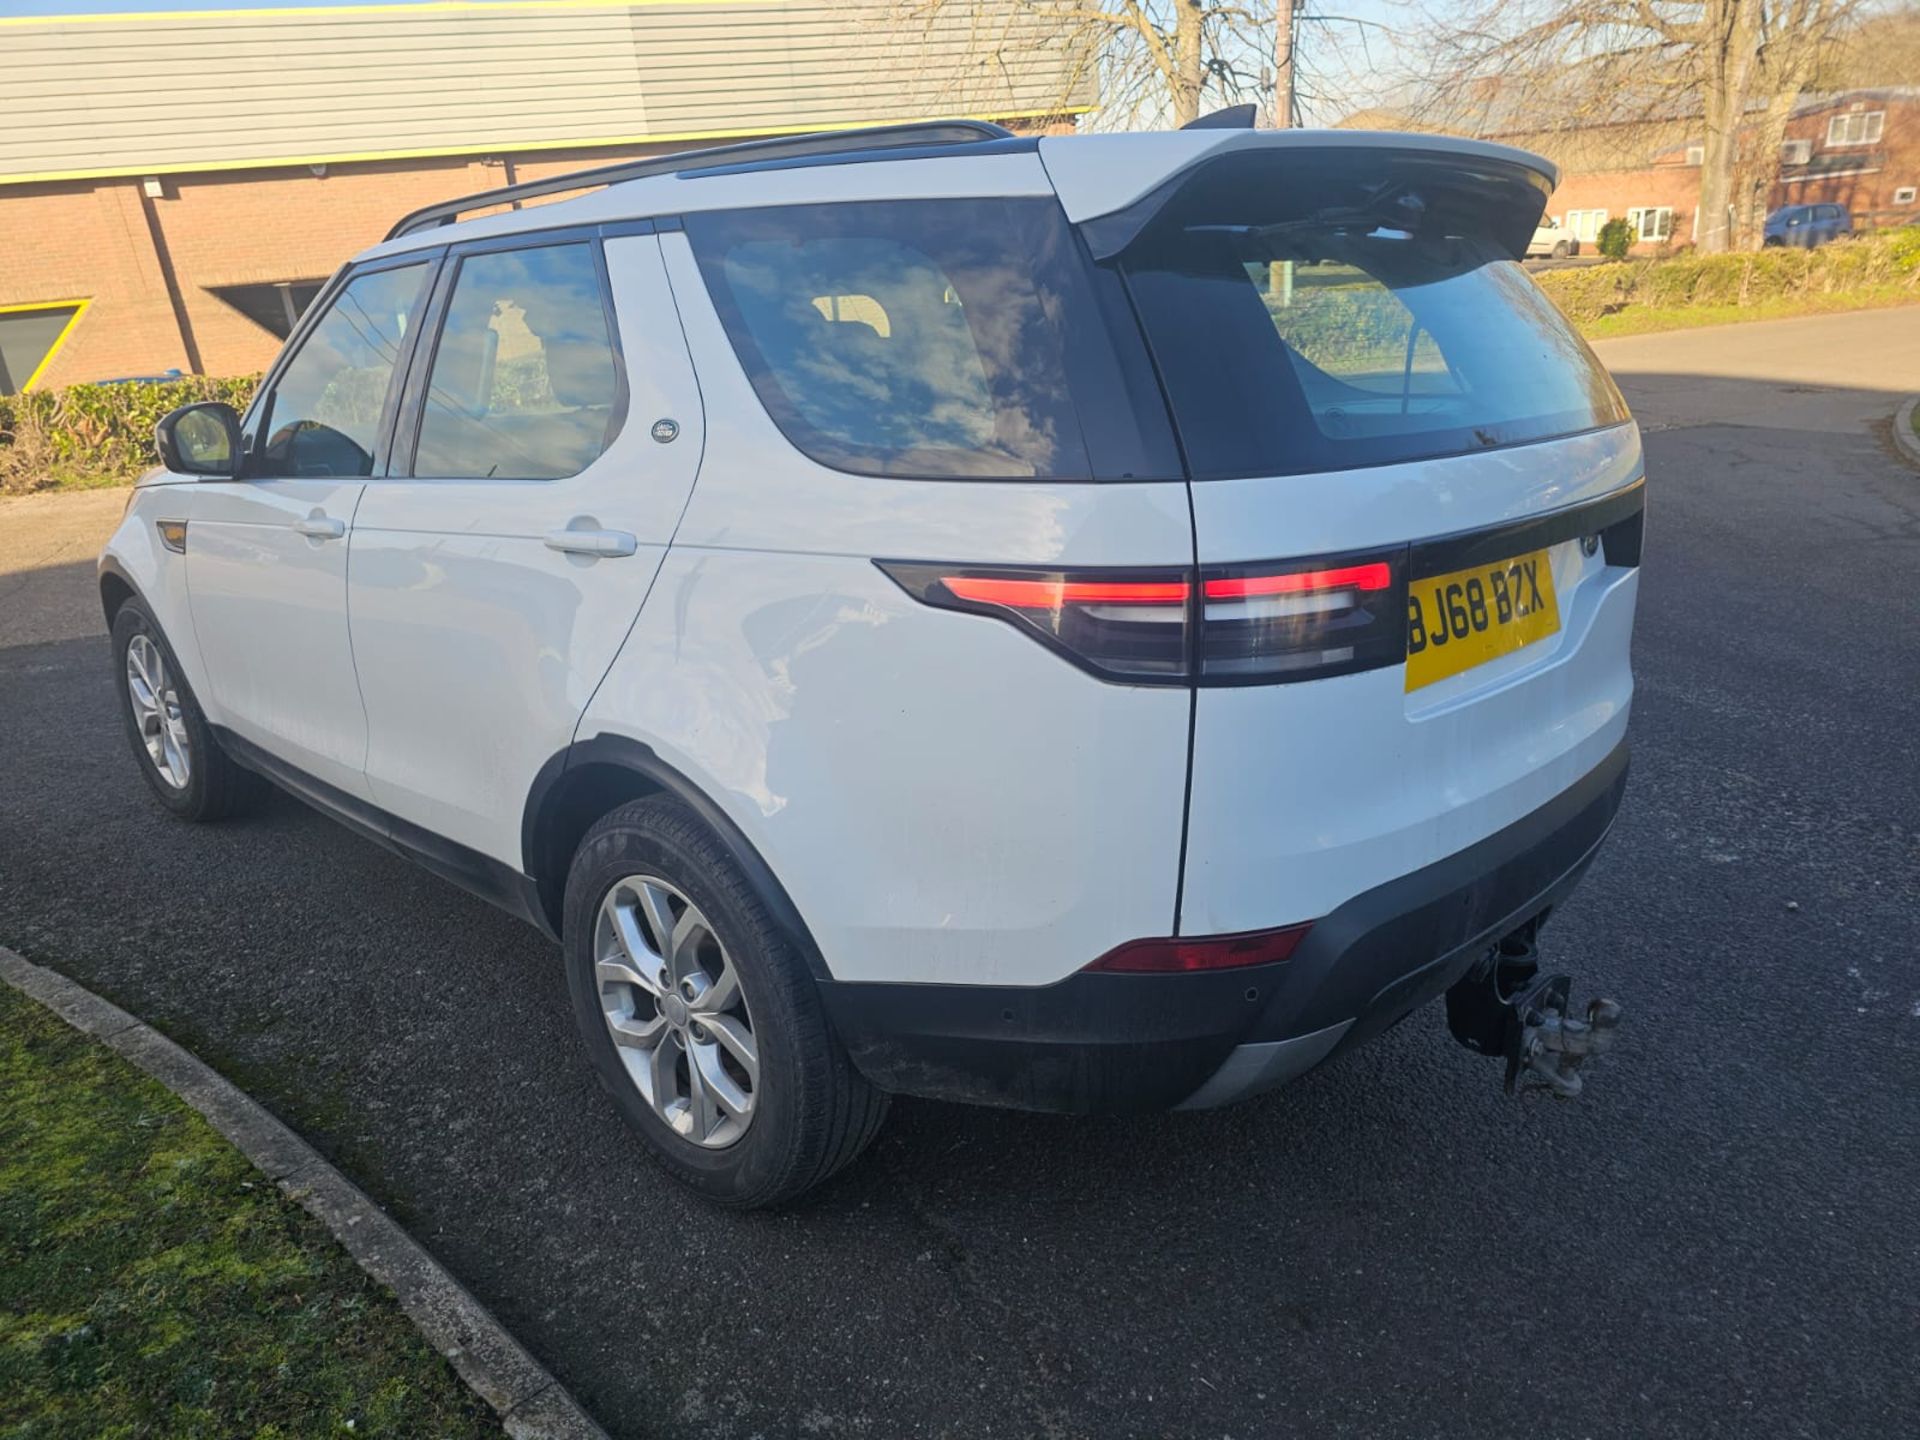 2018 DISCOVERY 5 SE RUNS AND DRIVES PERFECTLY - Bild 2 aus 6